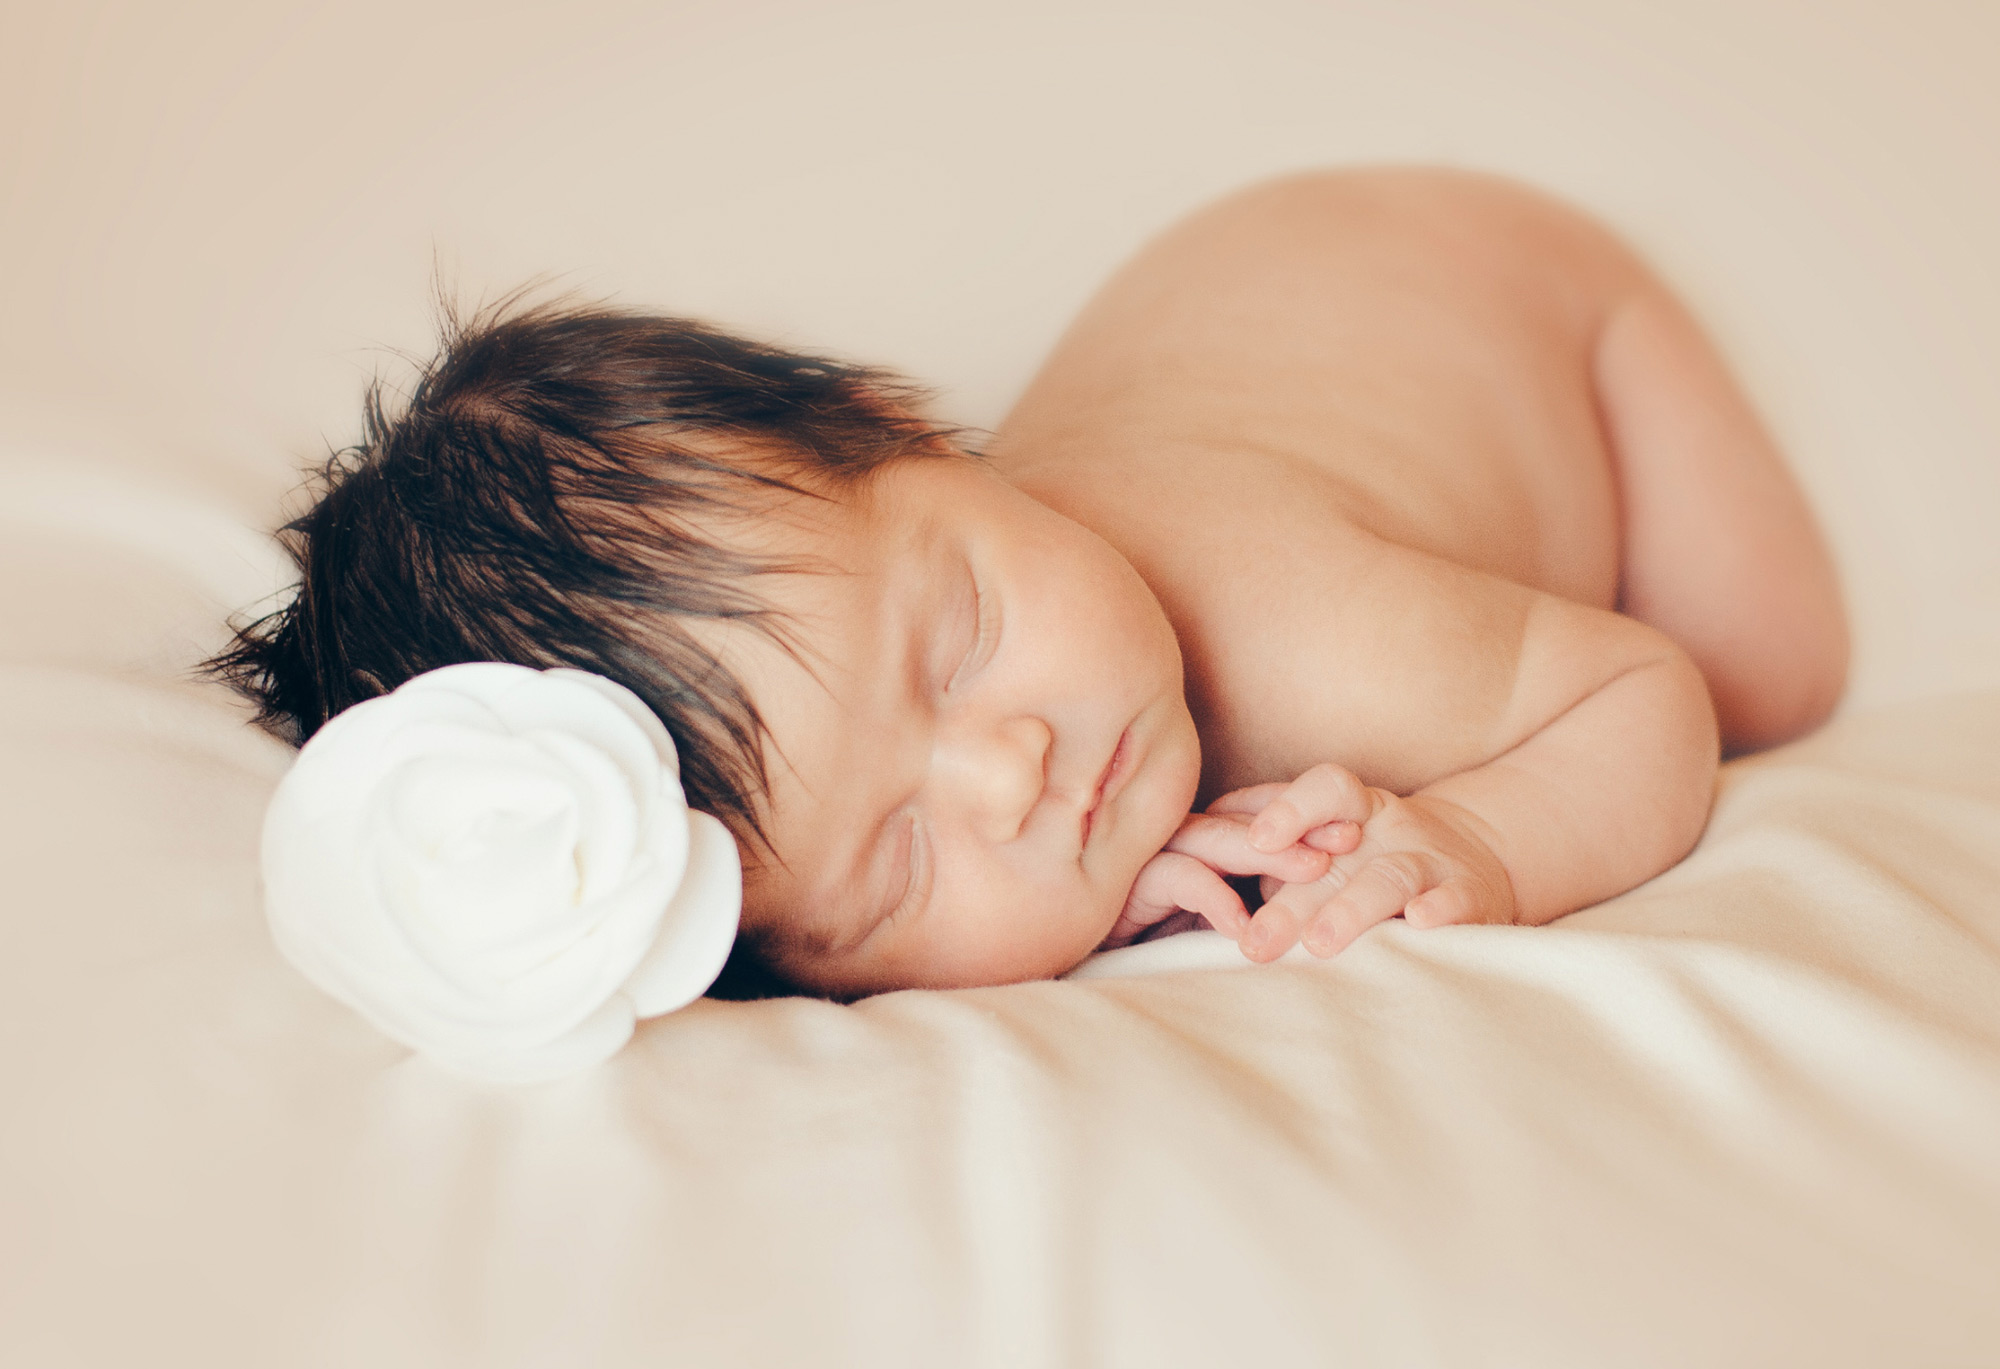 Sleeping asian baby girl on a smooth beige sheet. Baby has a white rose on her head.